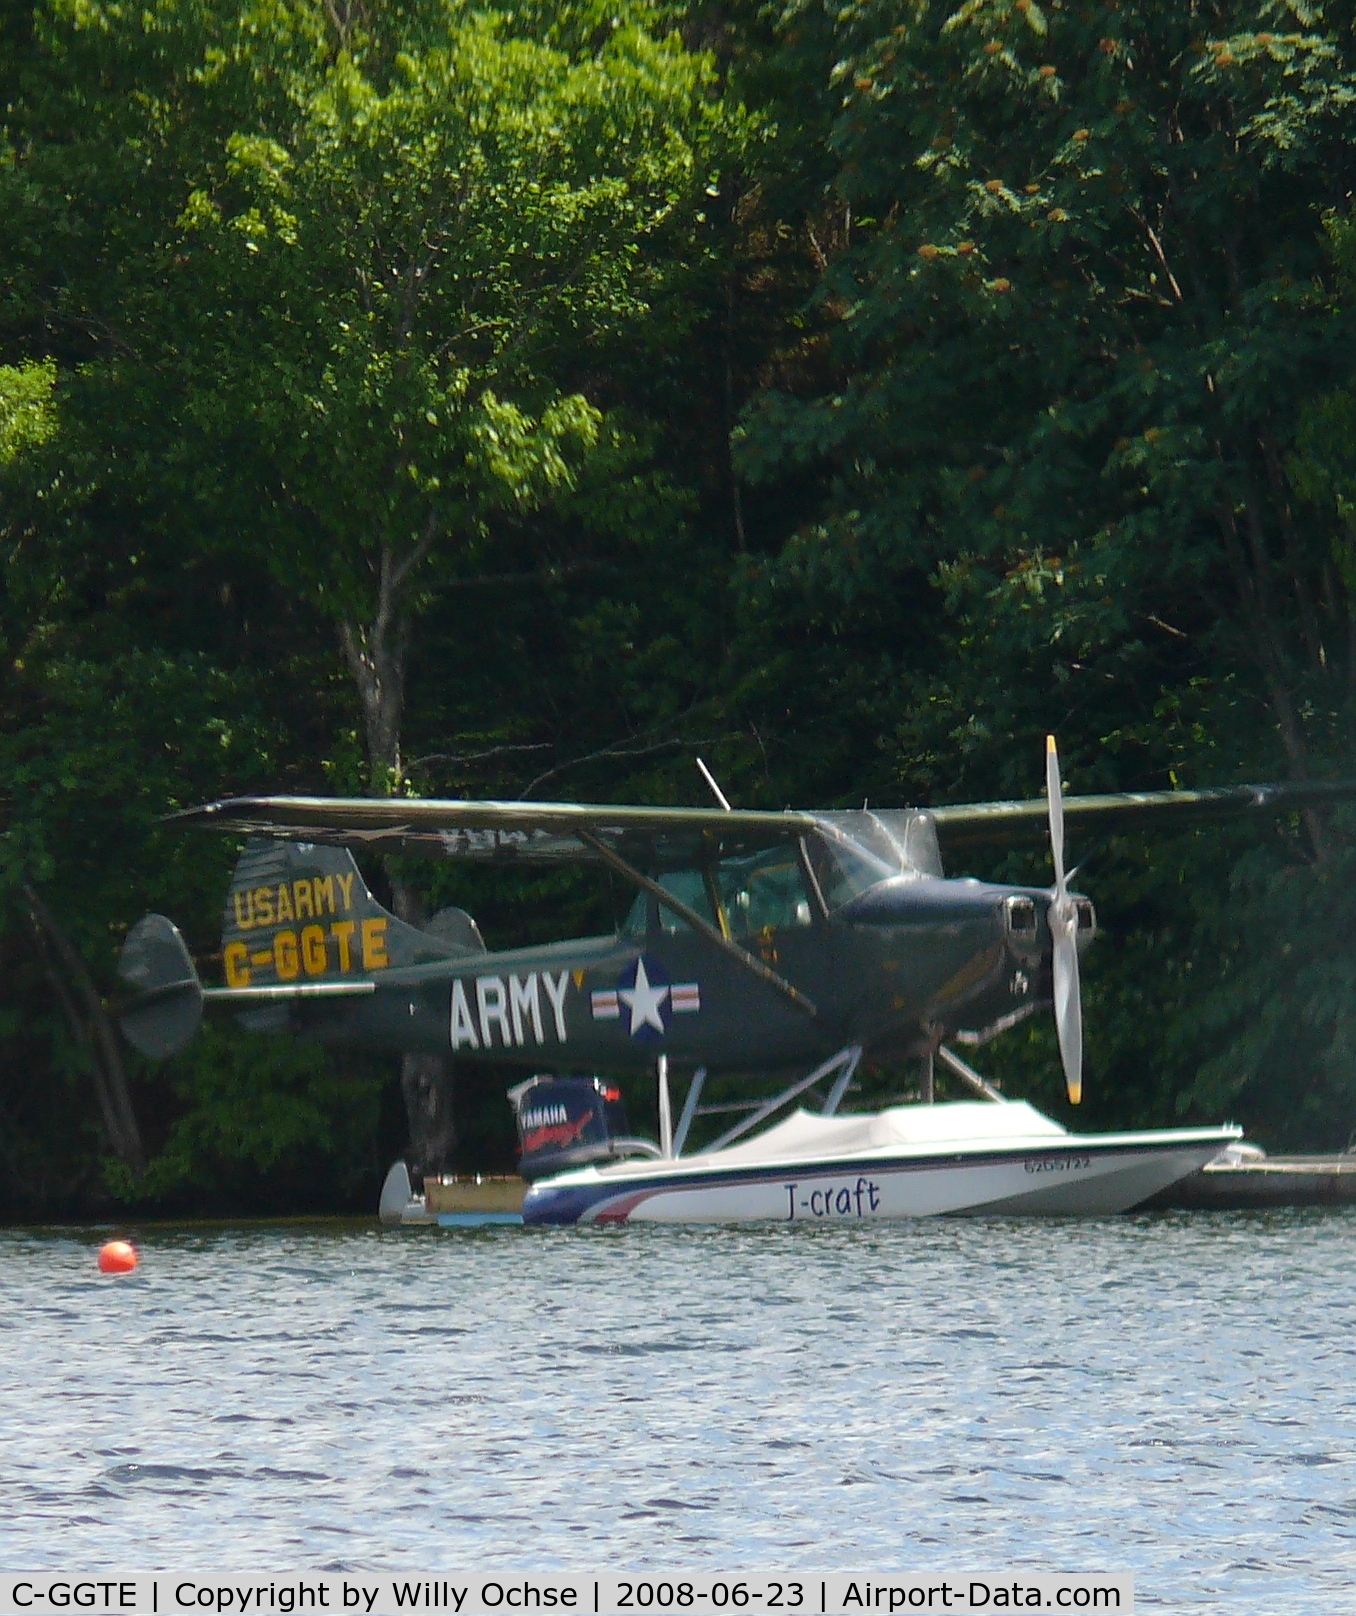 C-GGTE, Cessna 305A C/N 21327, June 2008 on a lake in Quebec